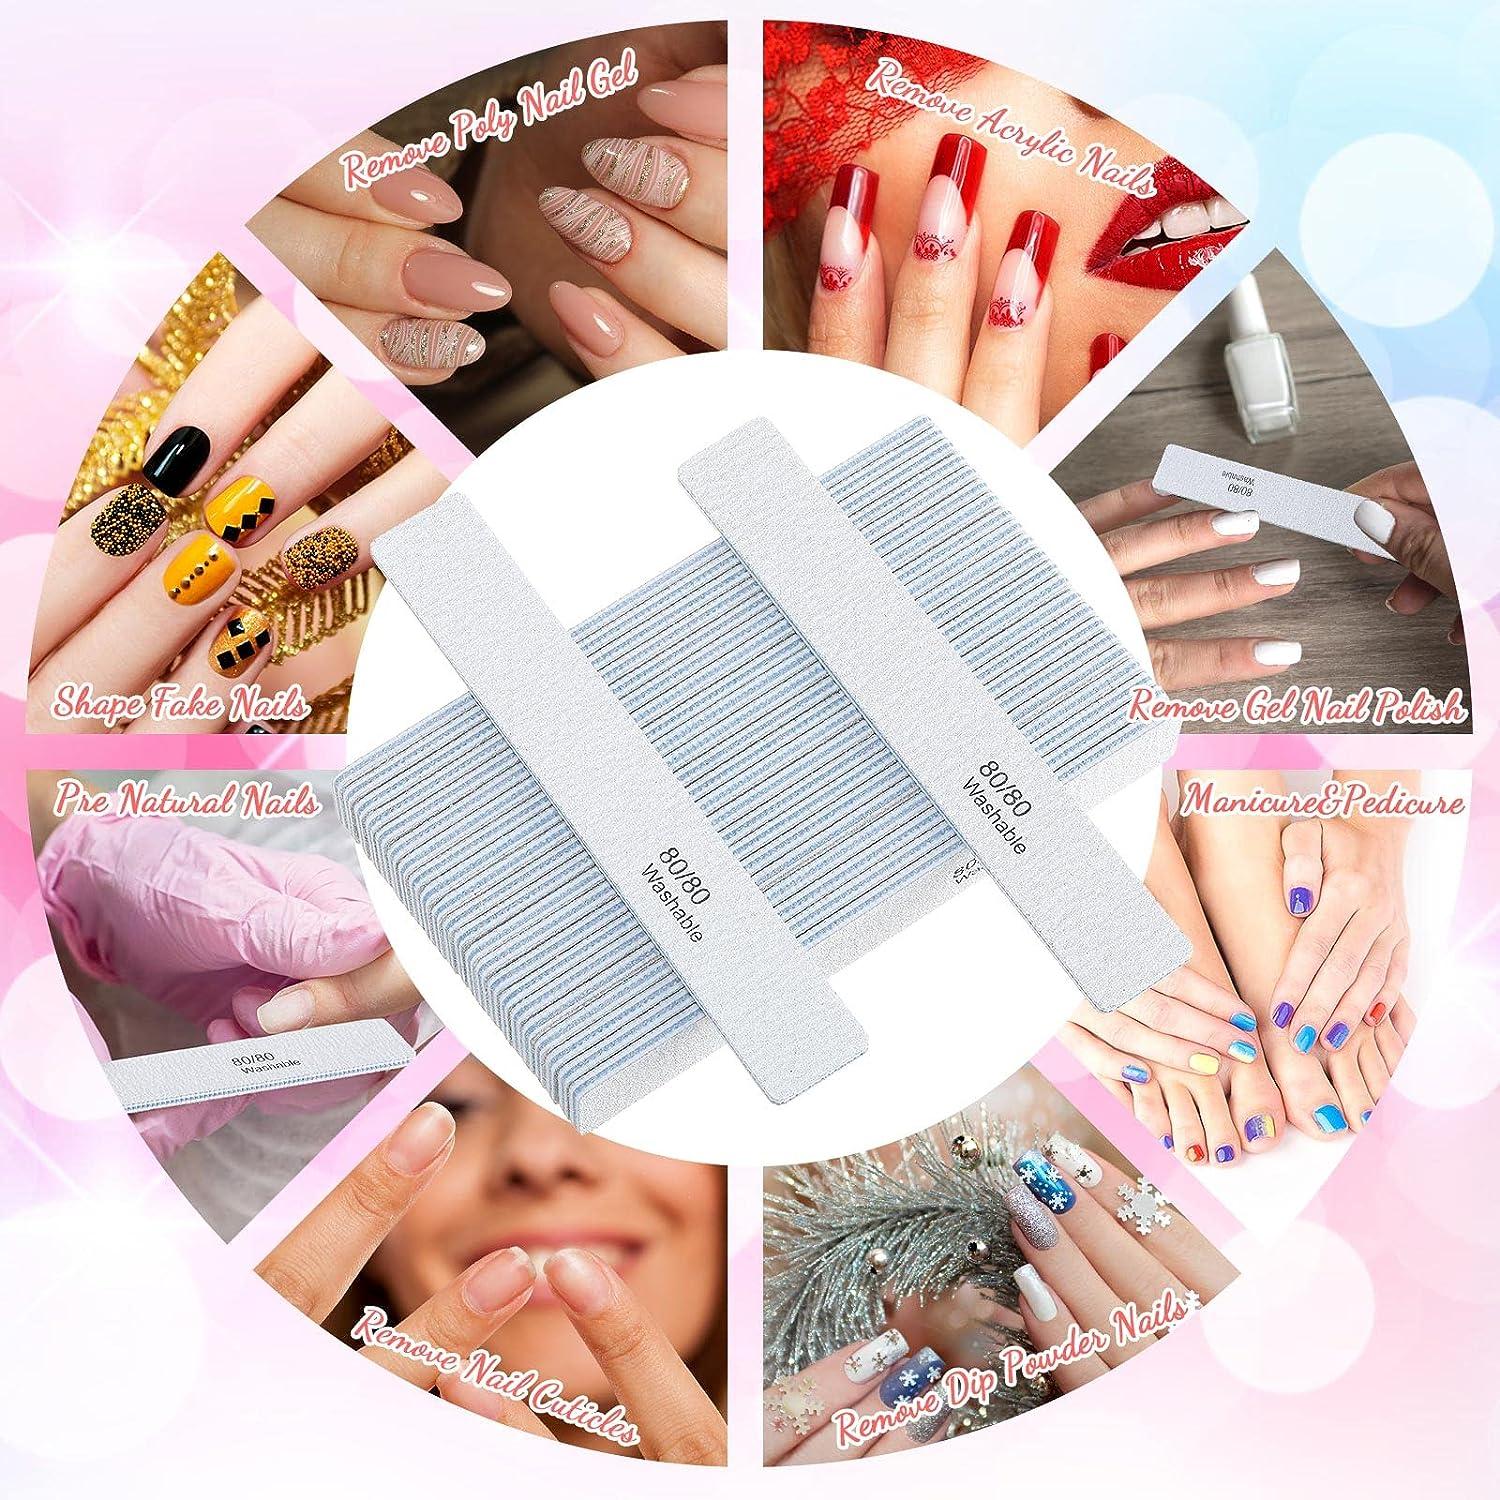 Squoval Nail Shape And How To File Them | Glamour UK